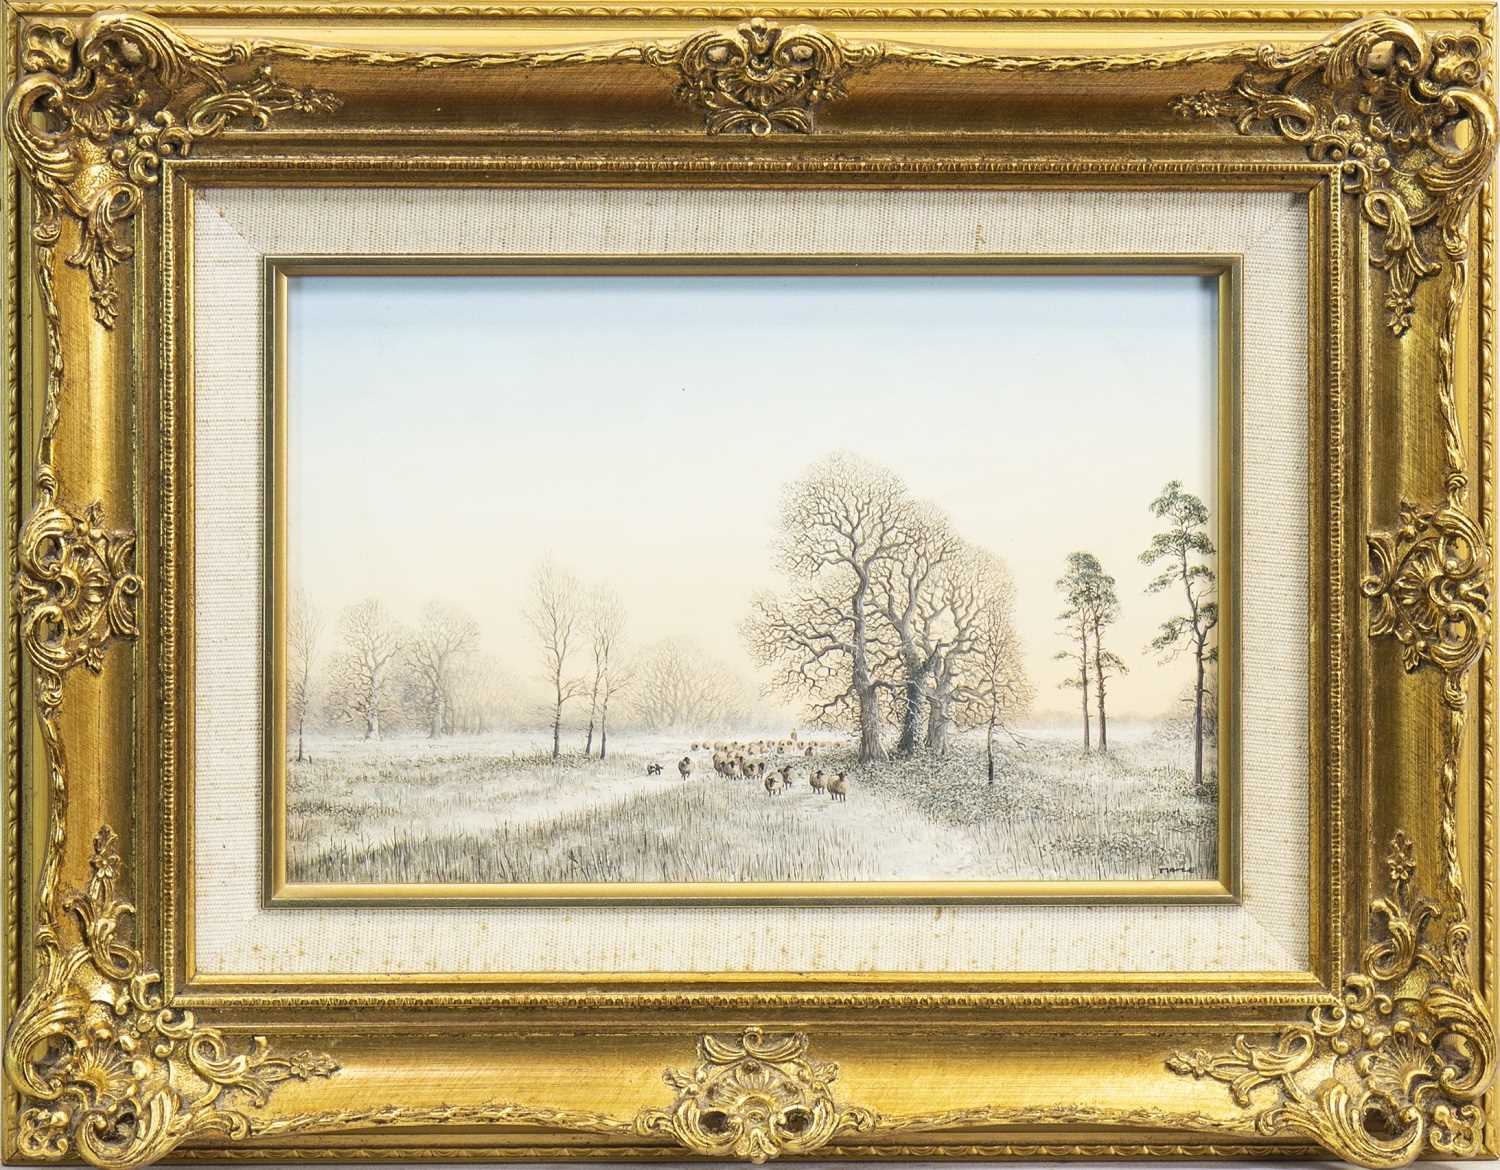 Lot 455 - SHEEP IN WINTER, AN OIL BY NICOLAS MACE